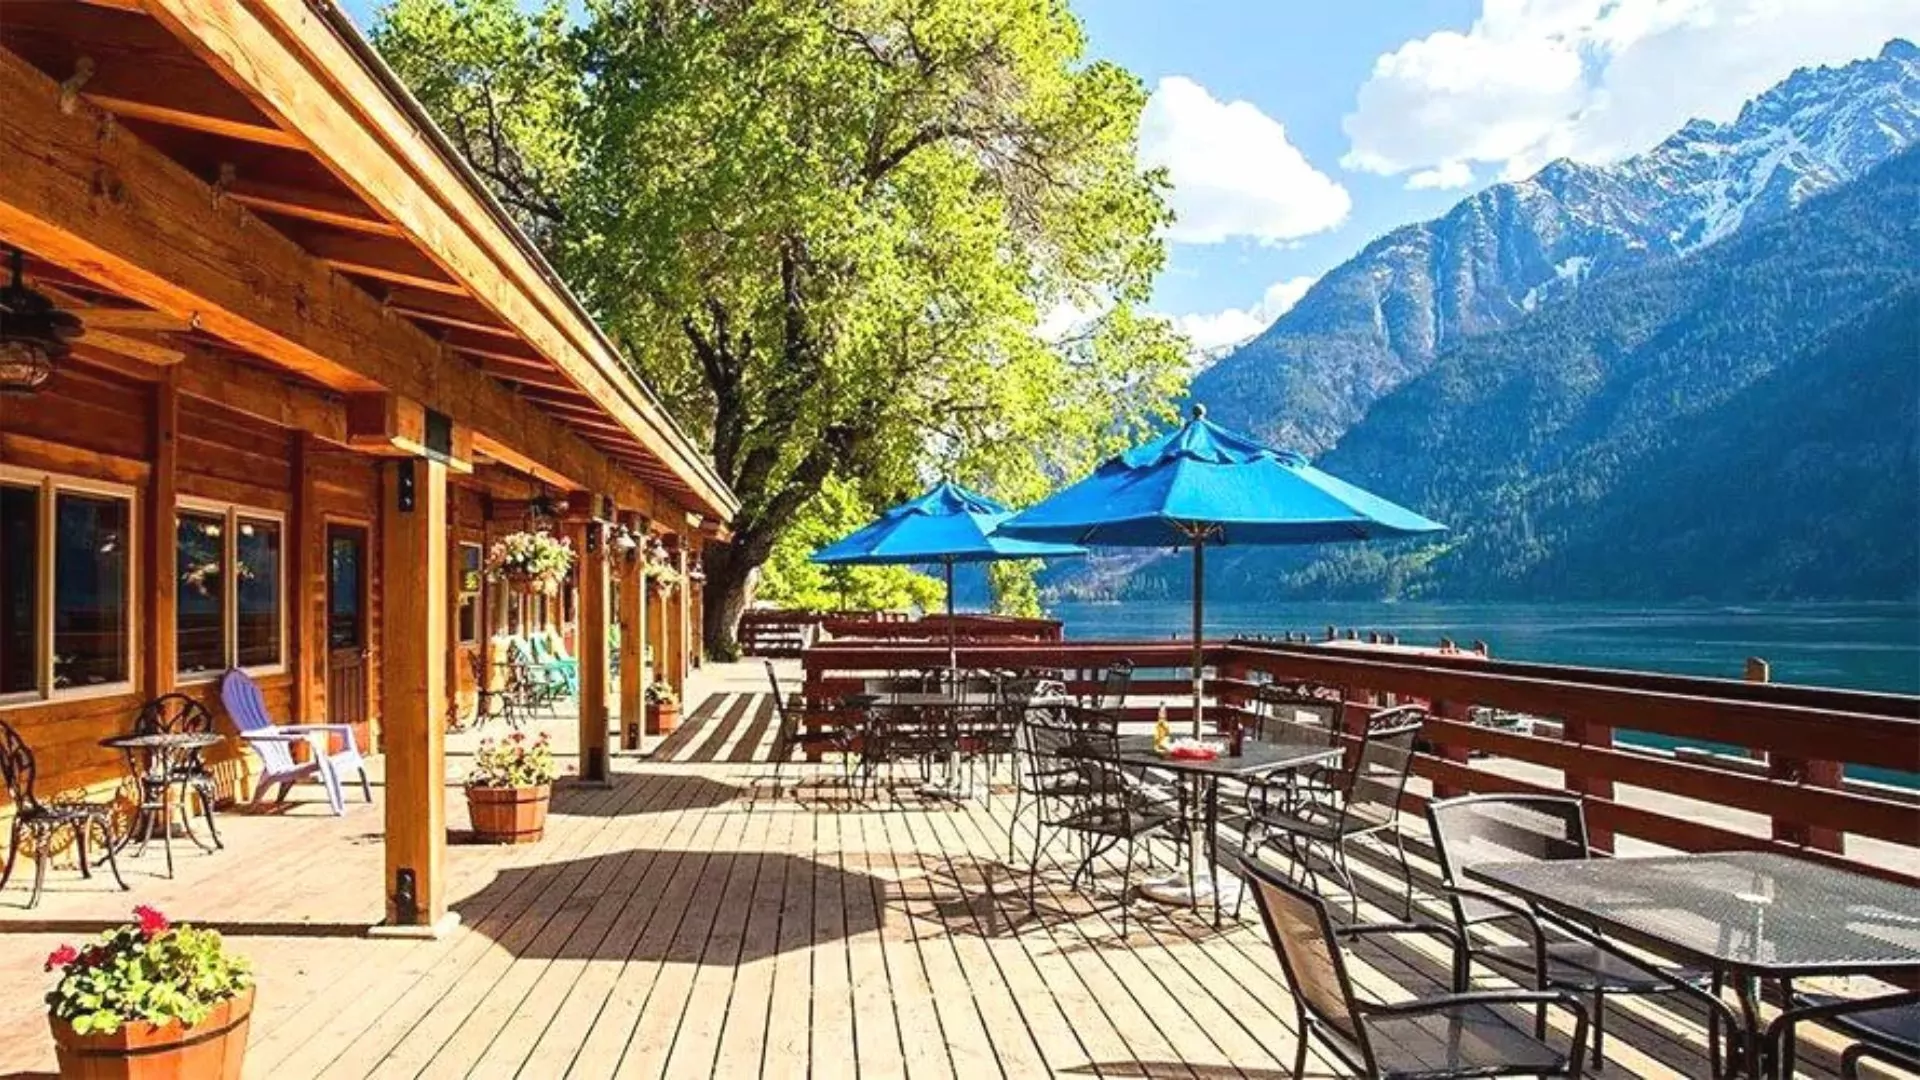 Lake Chelan Lodge in the town of Stehekin, Washinton sits besides the lake in the North Cascades Wilderness